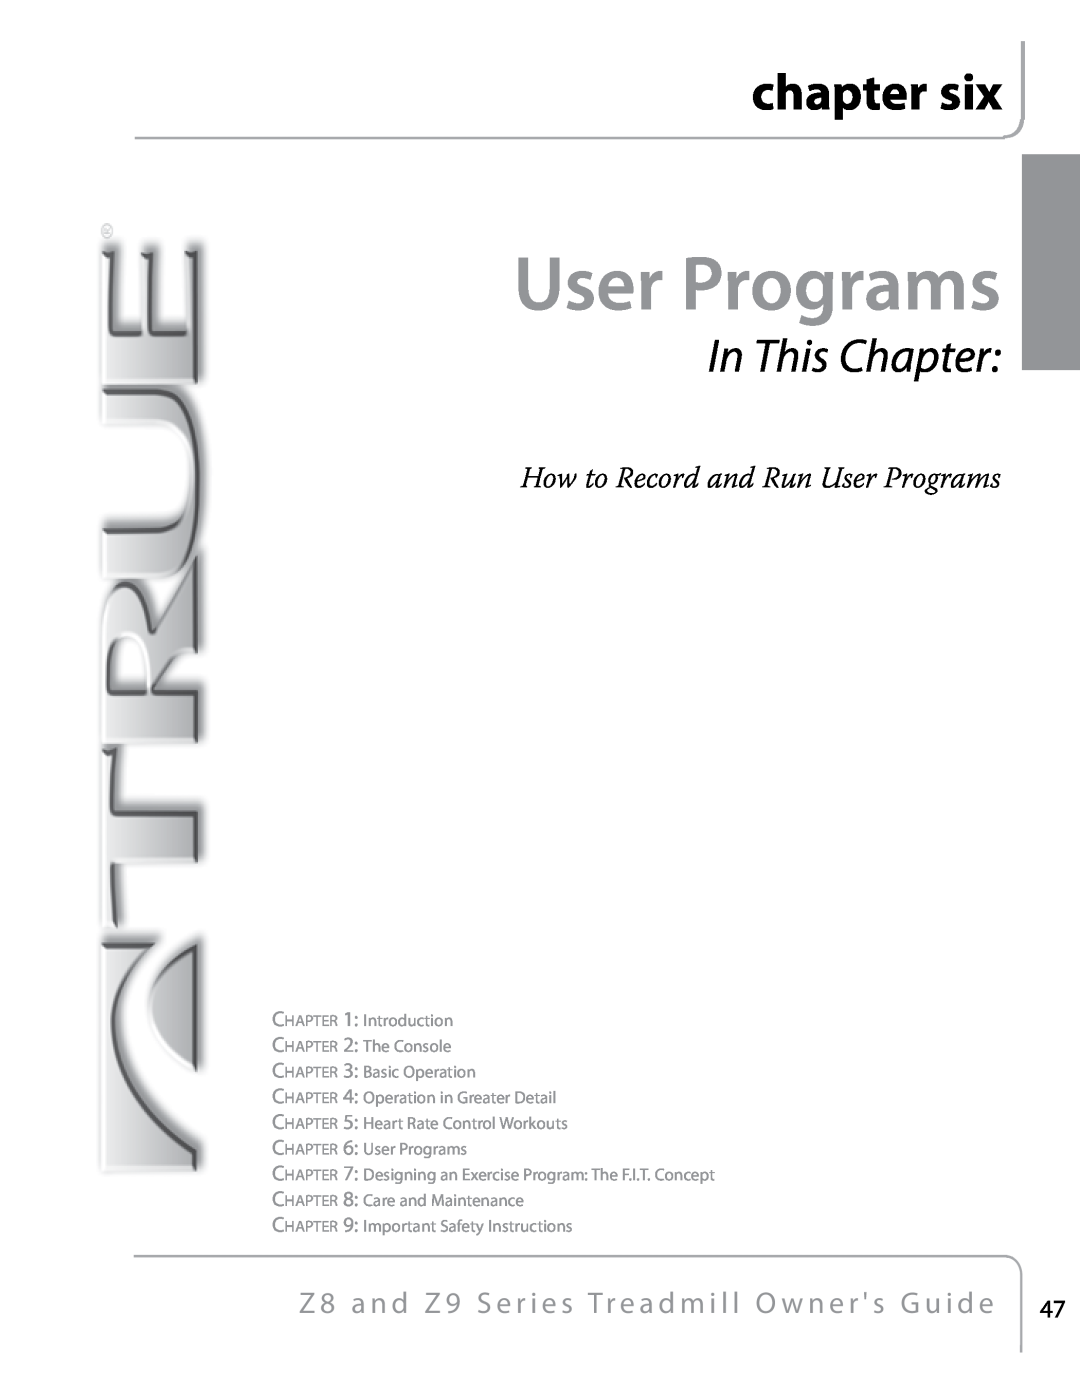 True Fitness Z9, Z8 manual User Programs, chapter six, In This Chapter 